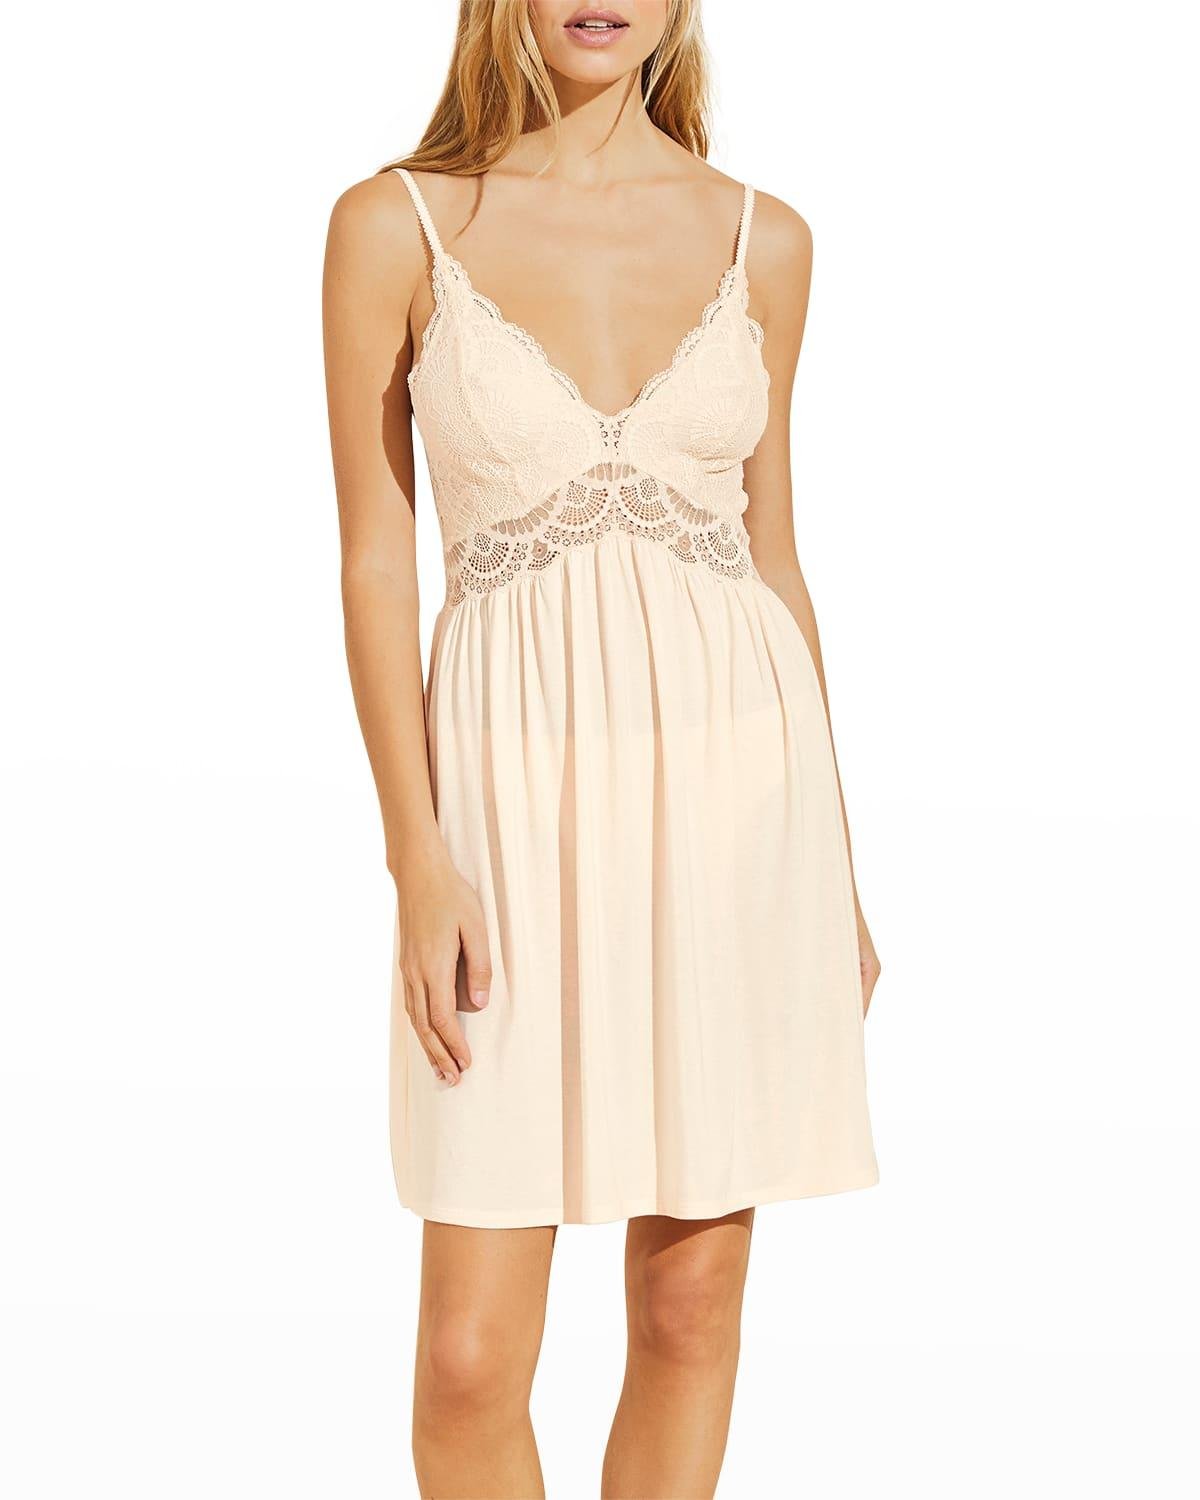 Marianna Mademoiselle Lace-Trim Chemise by EBERJEY